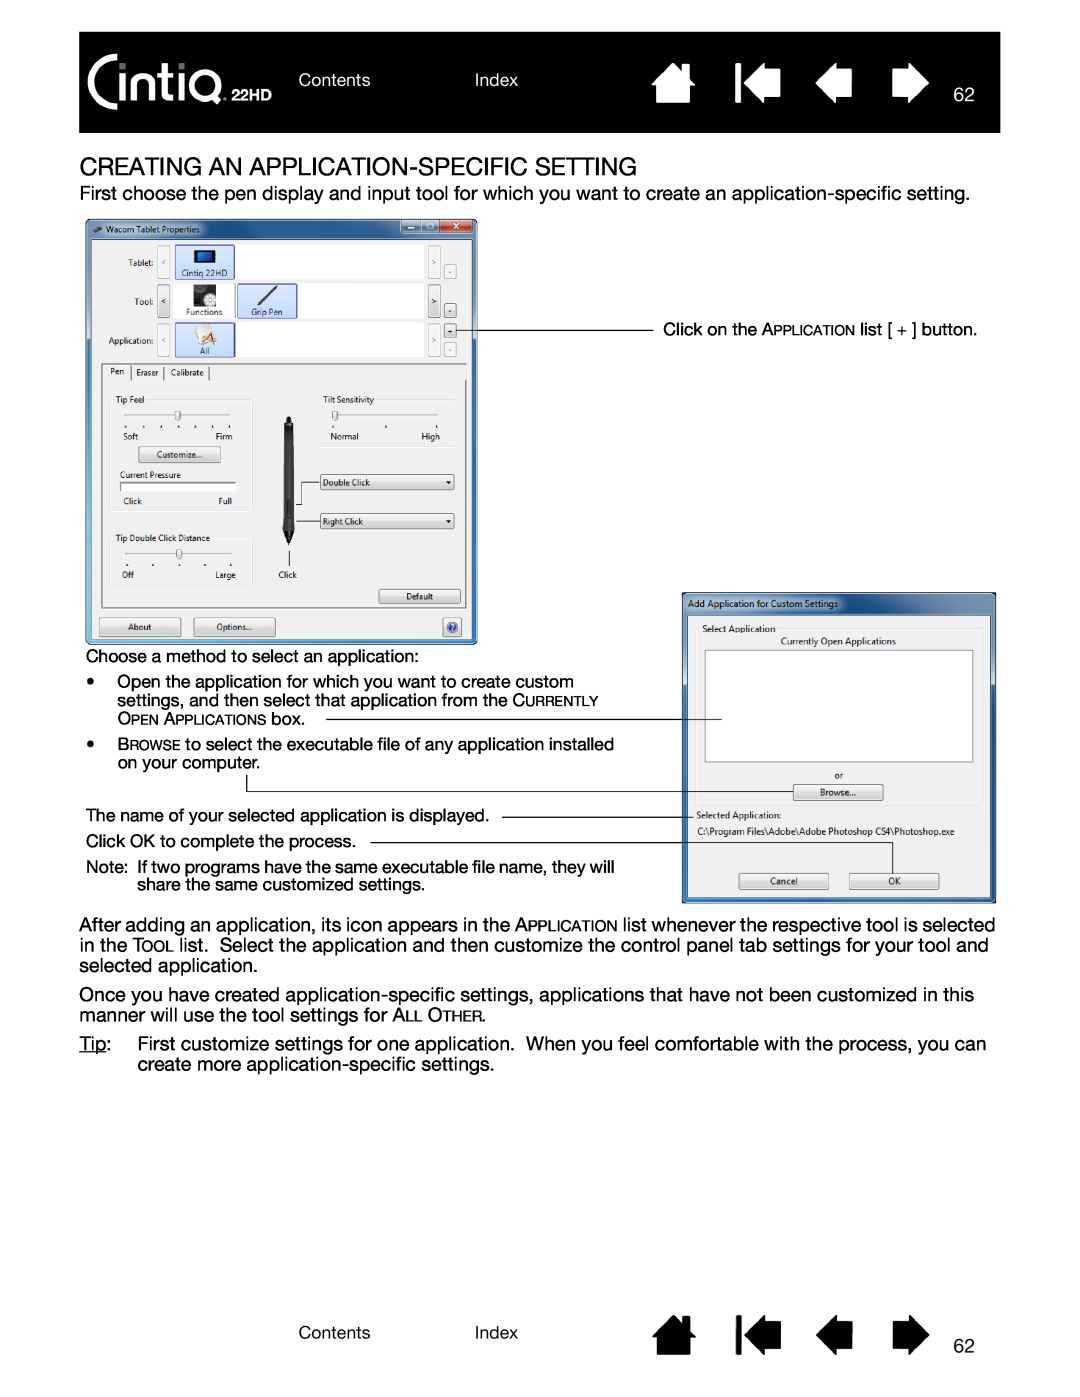 Wacom DTK-2200 user manual Creating An Application-Specific Setting, OPEN APPLICATIONS box 